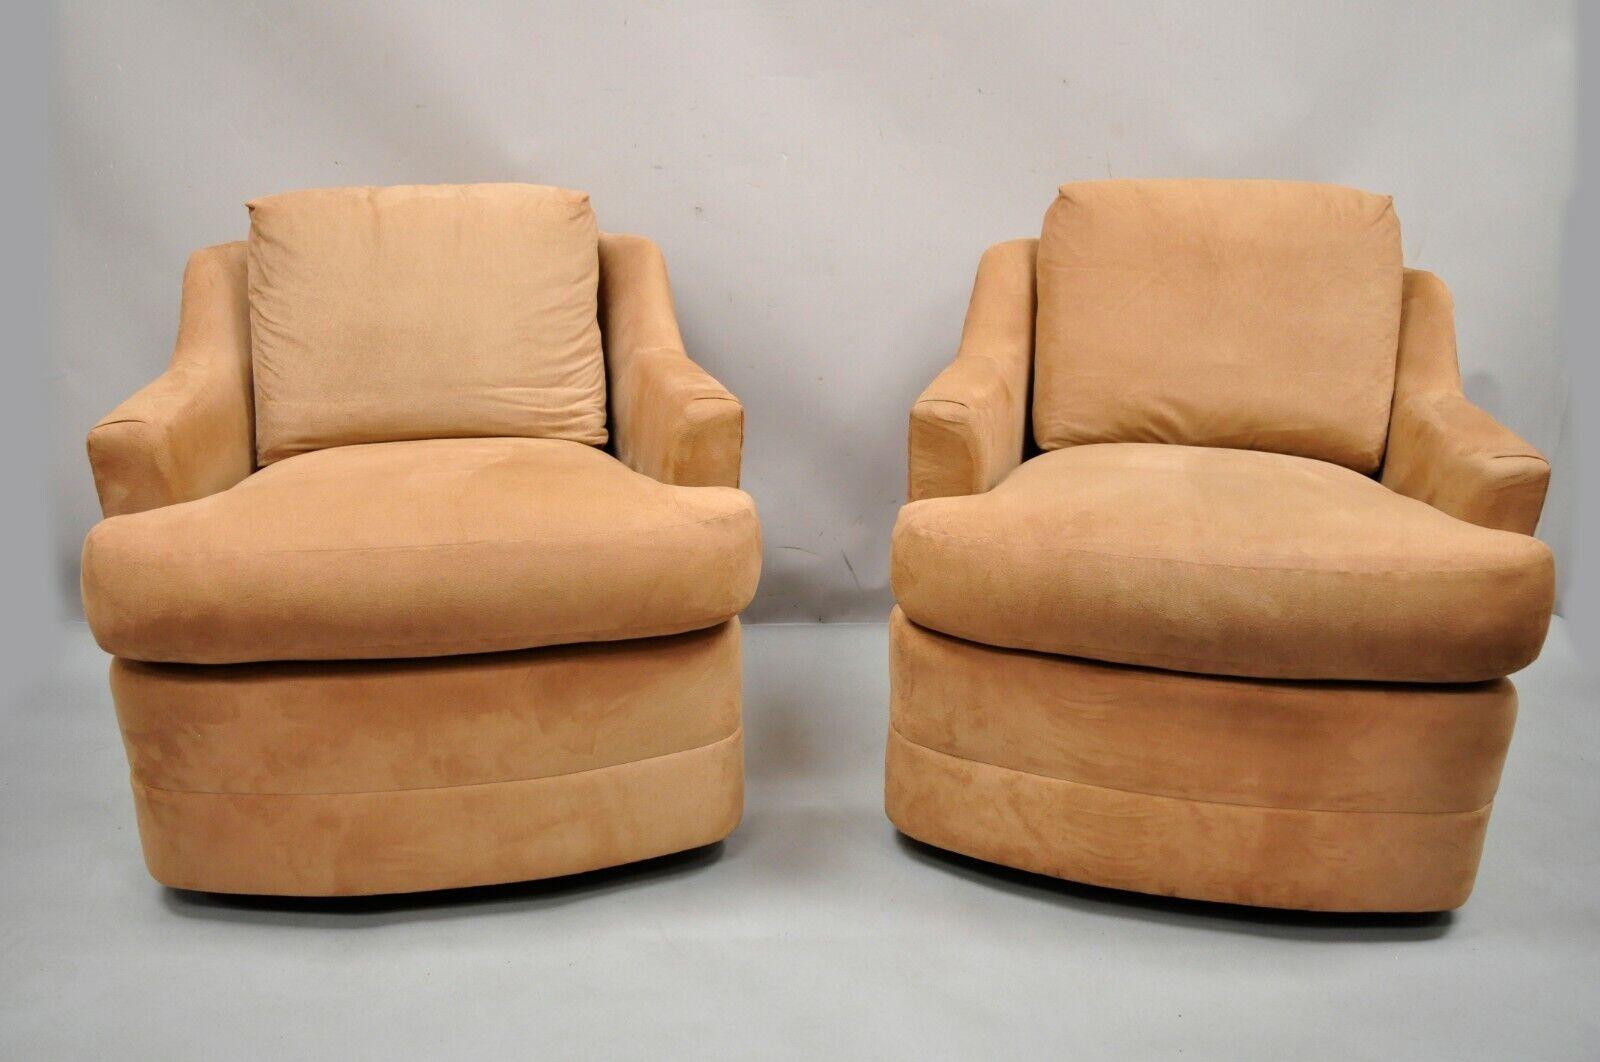 Vintage Mid-Century Modern swivel brown upholstered lounge club chairs - a pair. Item features a round swivel pedestal base, fully upholstered frames, Ultrasuede fabric, very nice vintage pair, clean modernist lines, quality American craftsmanship.